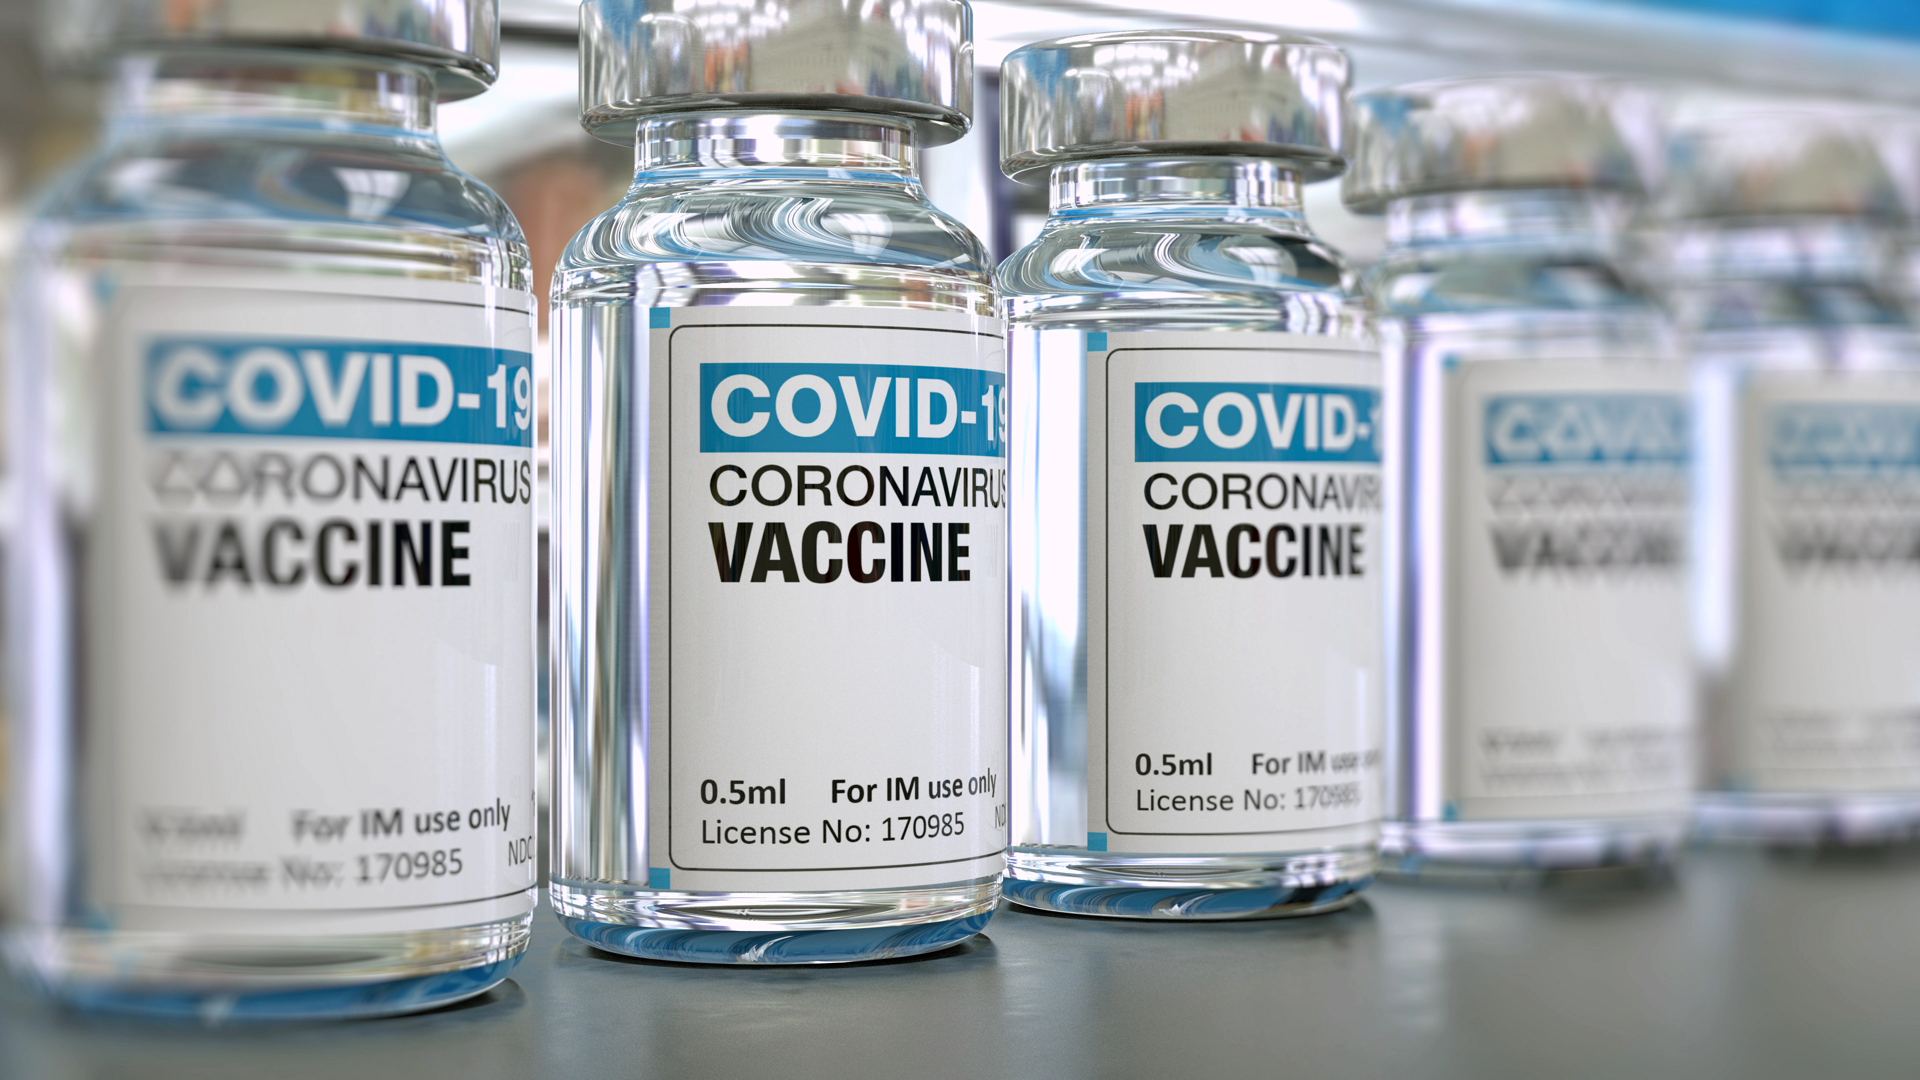 India's Covid-19 vaccination: Record 12 million vaccine doses administered in a day.